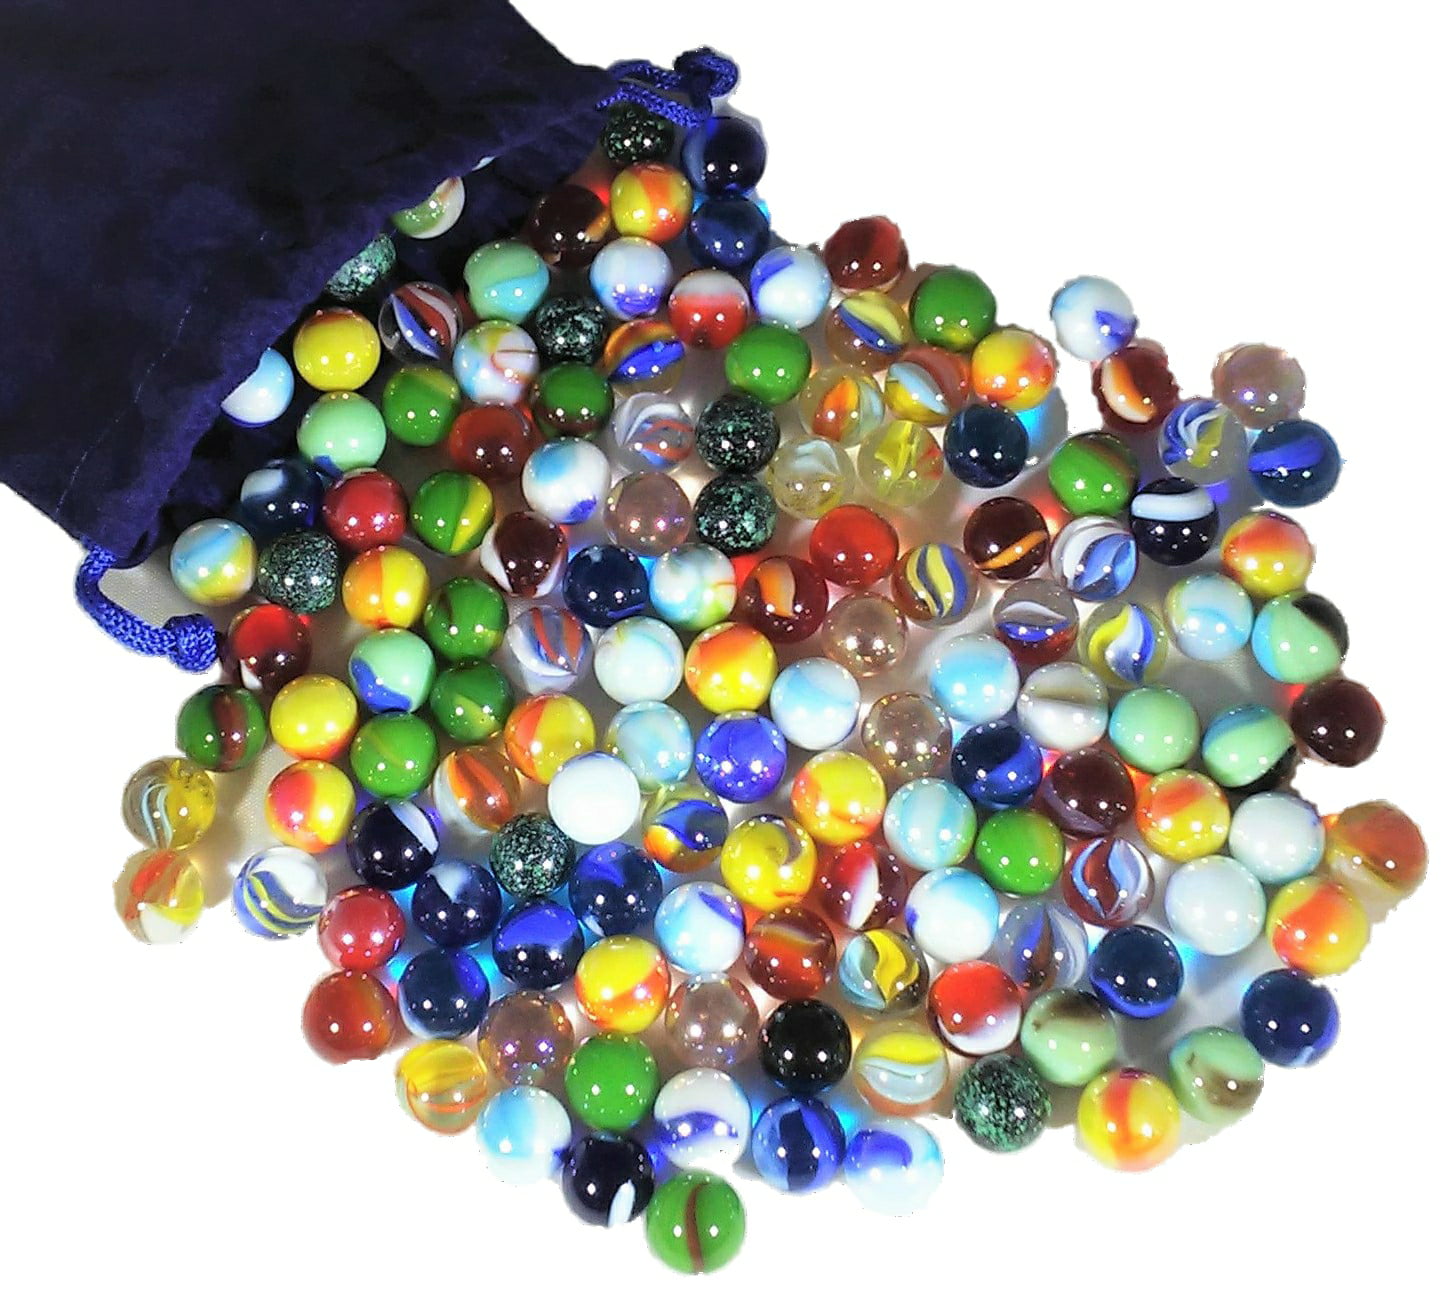 50 ROOSTER GLASS PEEWEE MARBLES 10mm traditional toy marble run party bags 